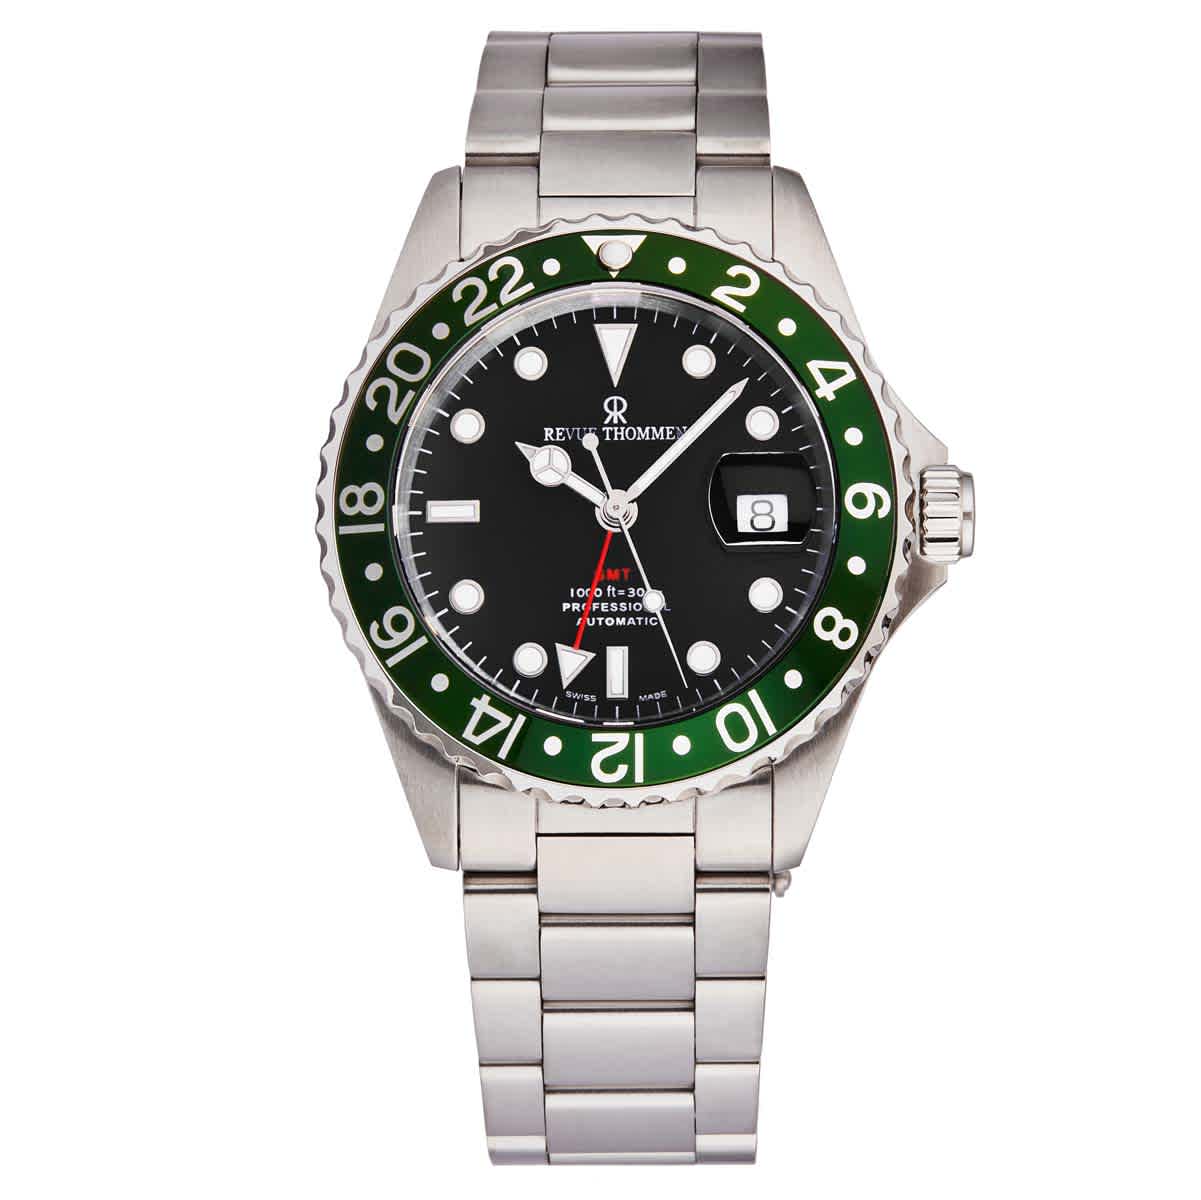 Revue Thommen Diver Automatic Black Dial Mens Watch 17572.2134 In Black / Green